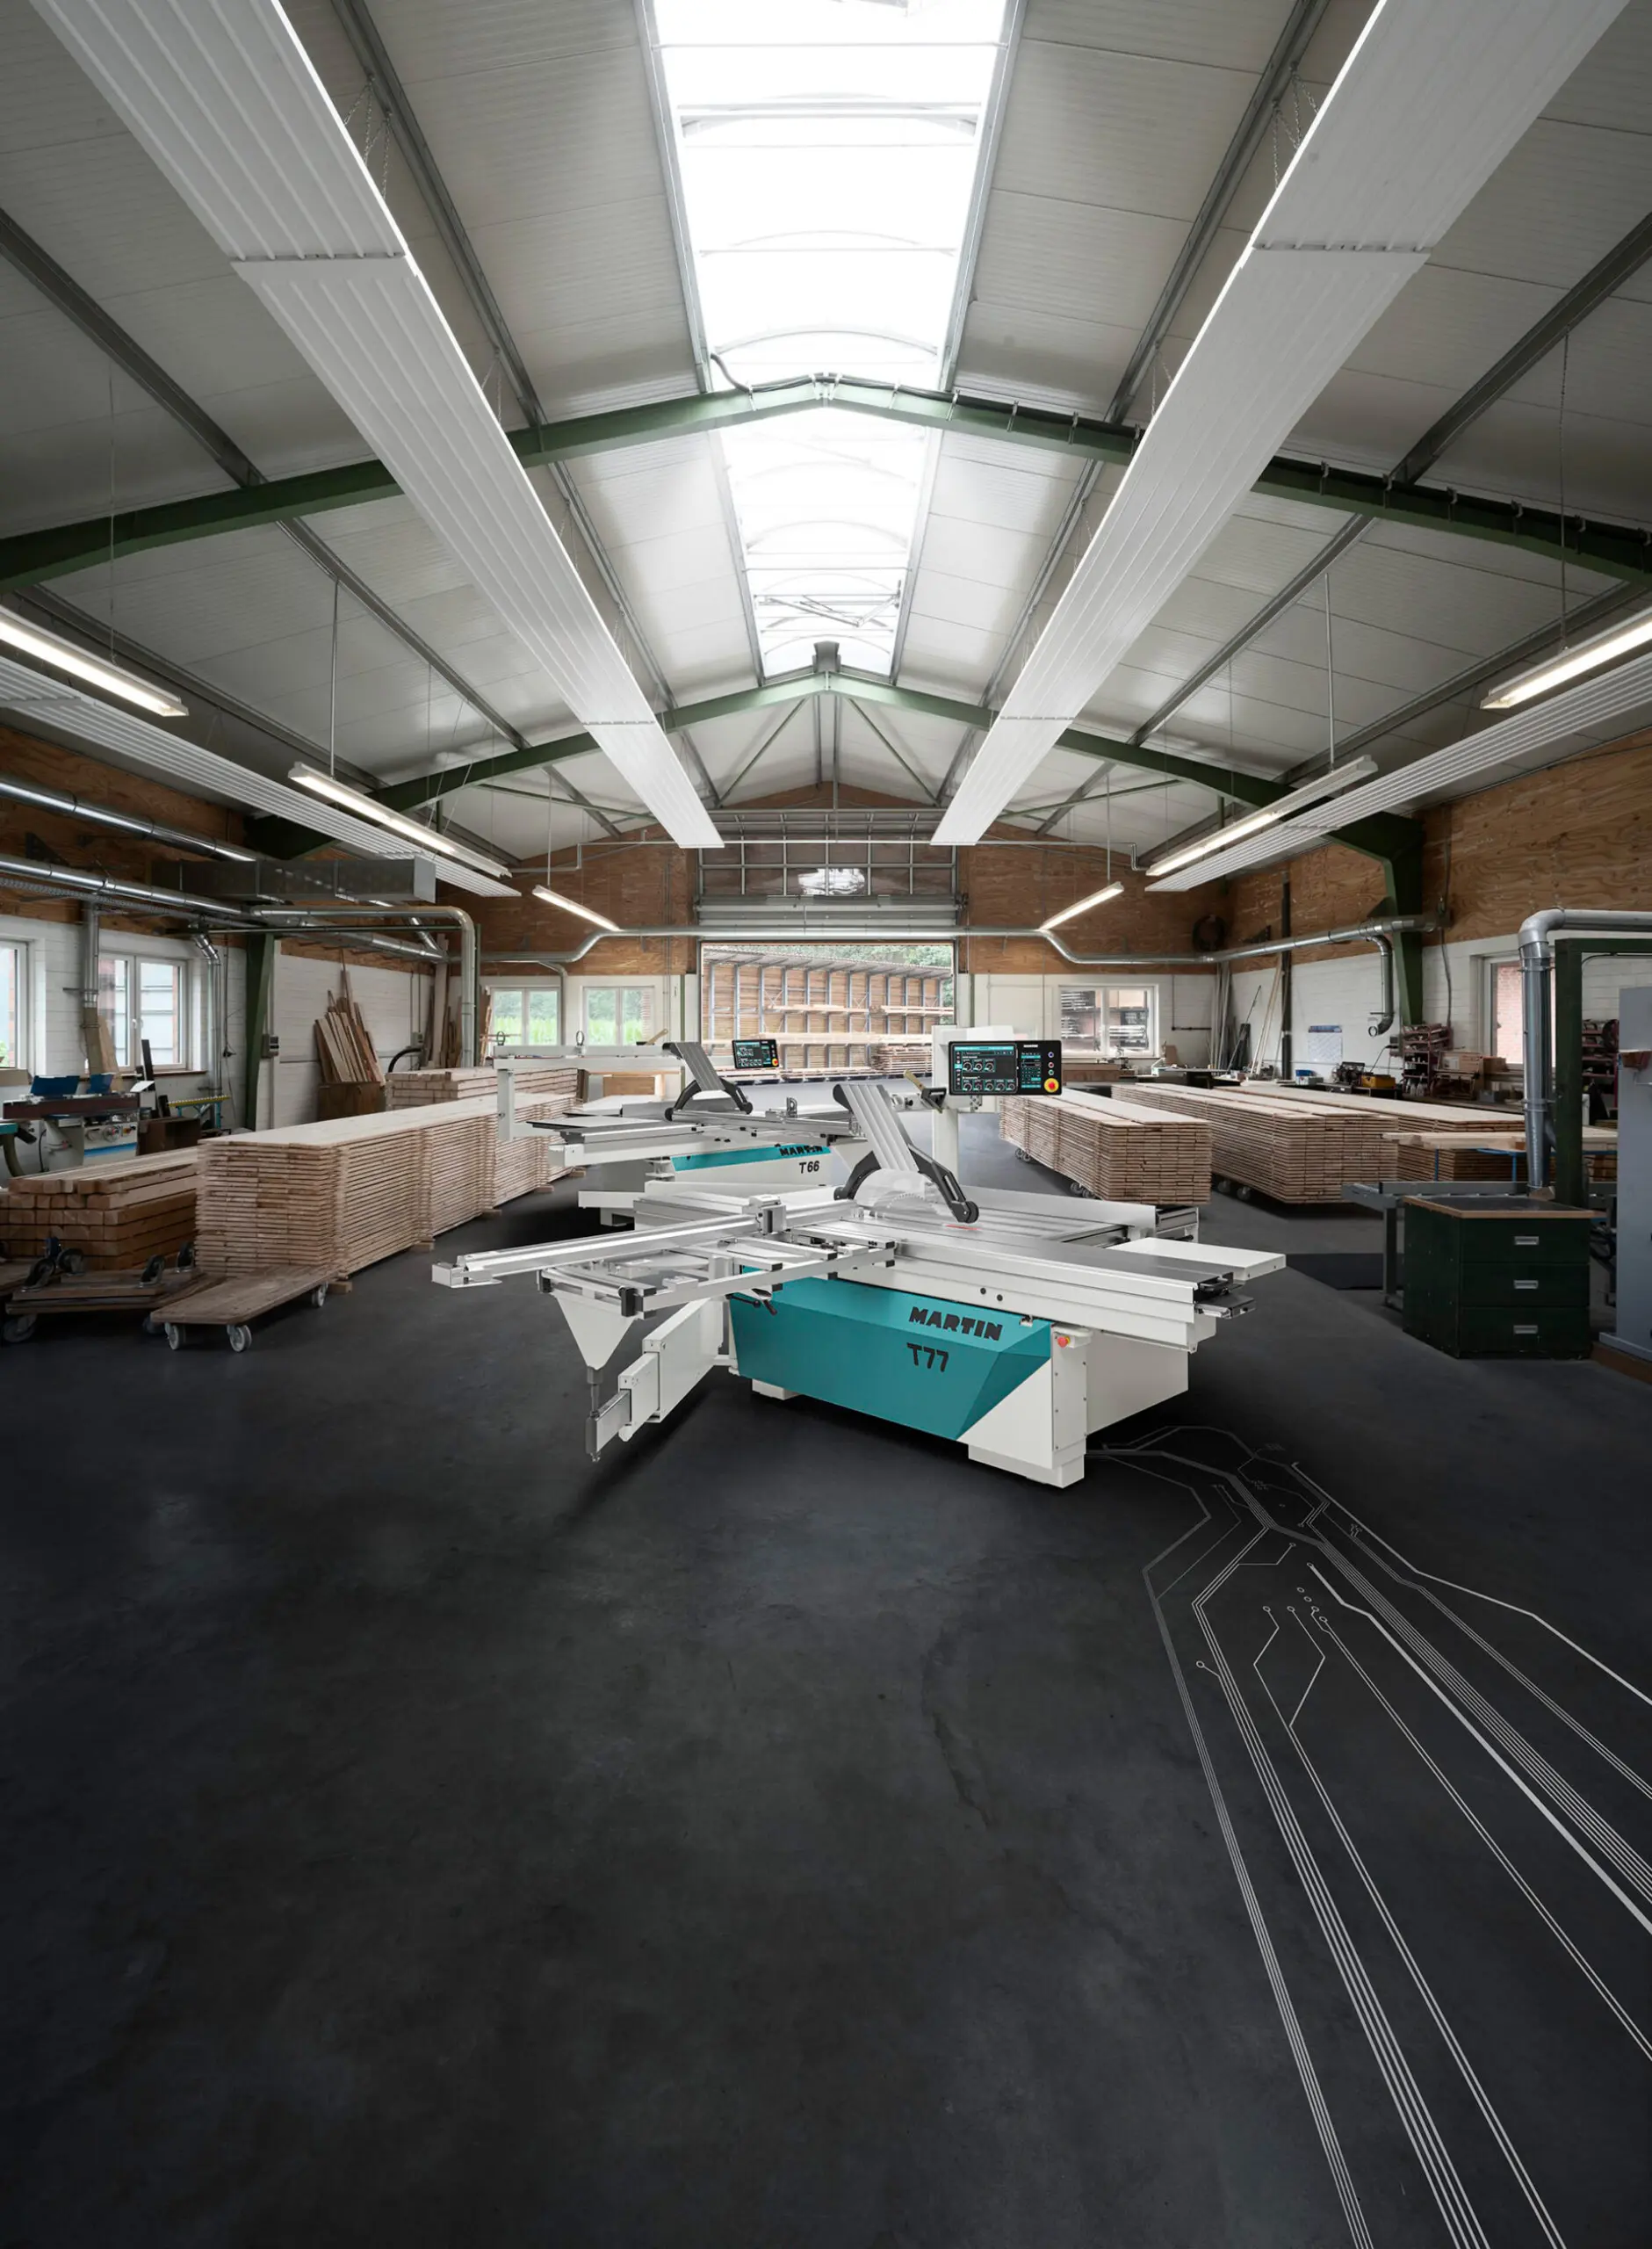 advertising photo of an interior of a large industrial workshop with a 3d rendered woodworking machine